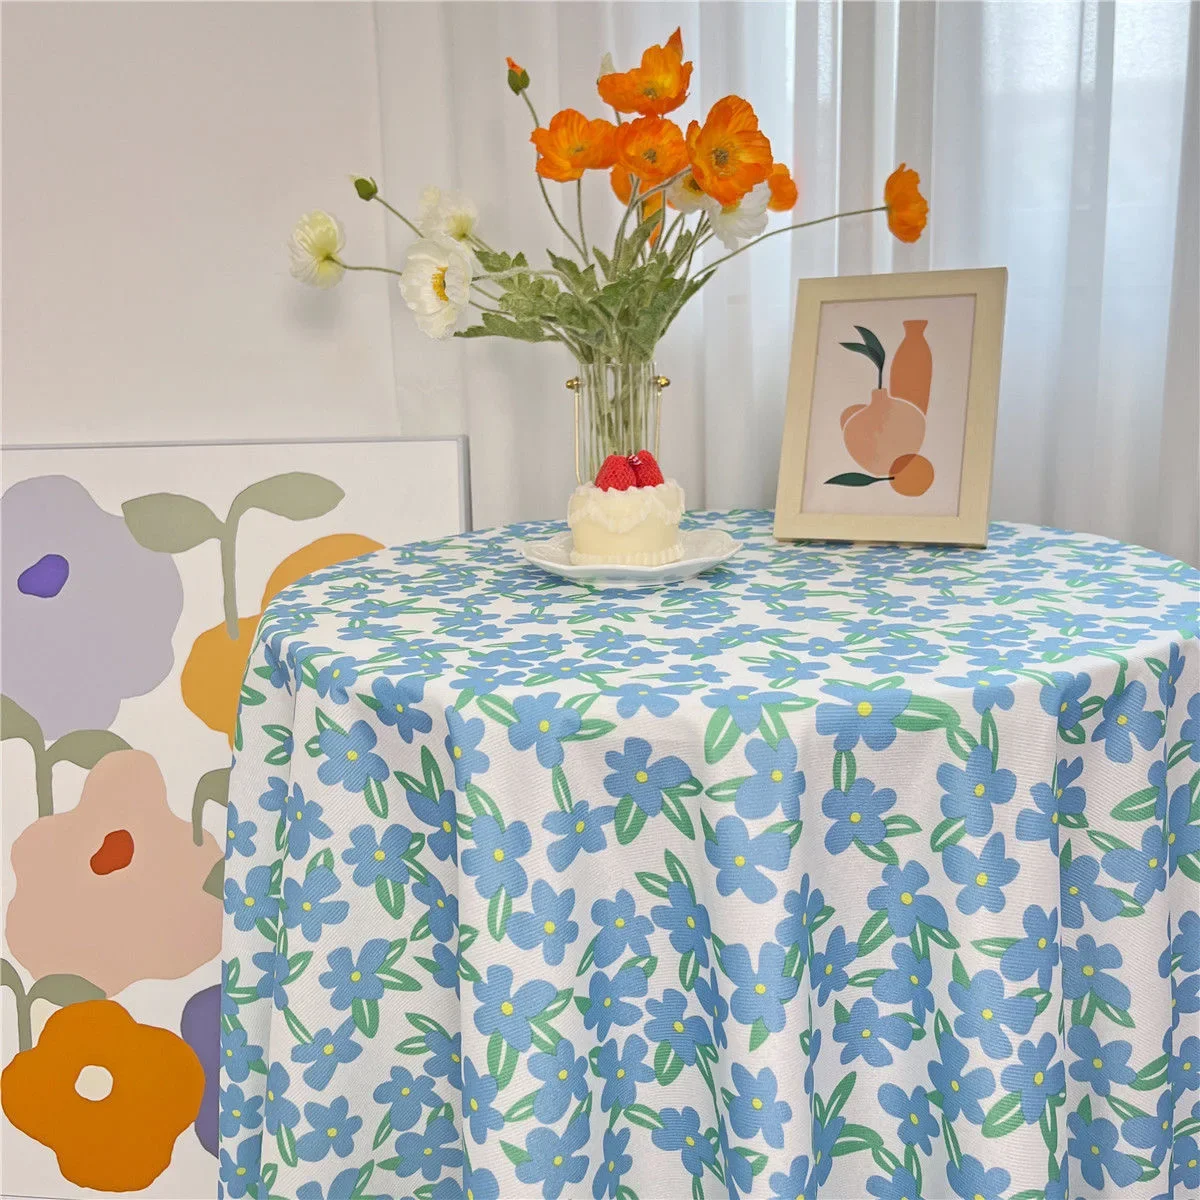 

Checkered Book Table Cloth Fabric Art Girl Heart Inn Style Bedroom Table Cloth Table Cloth Xiao Qing New Style I1U3863